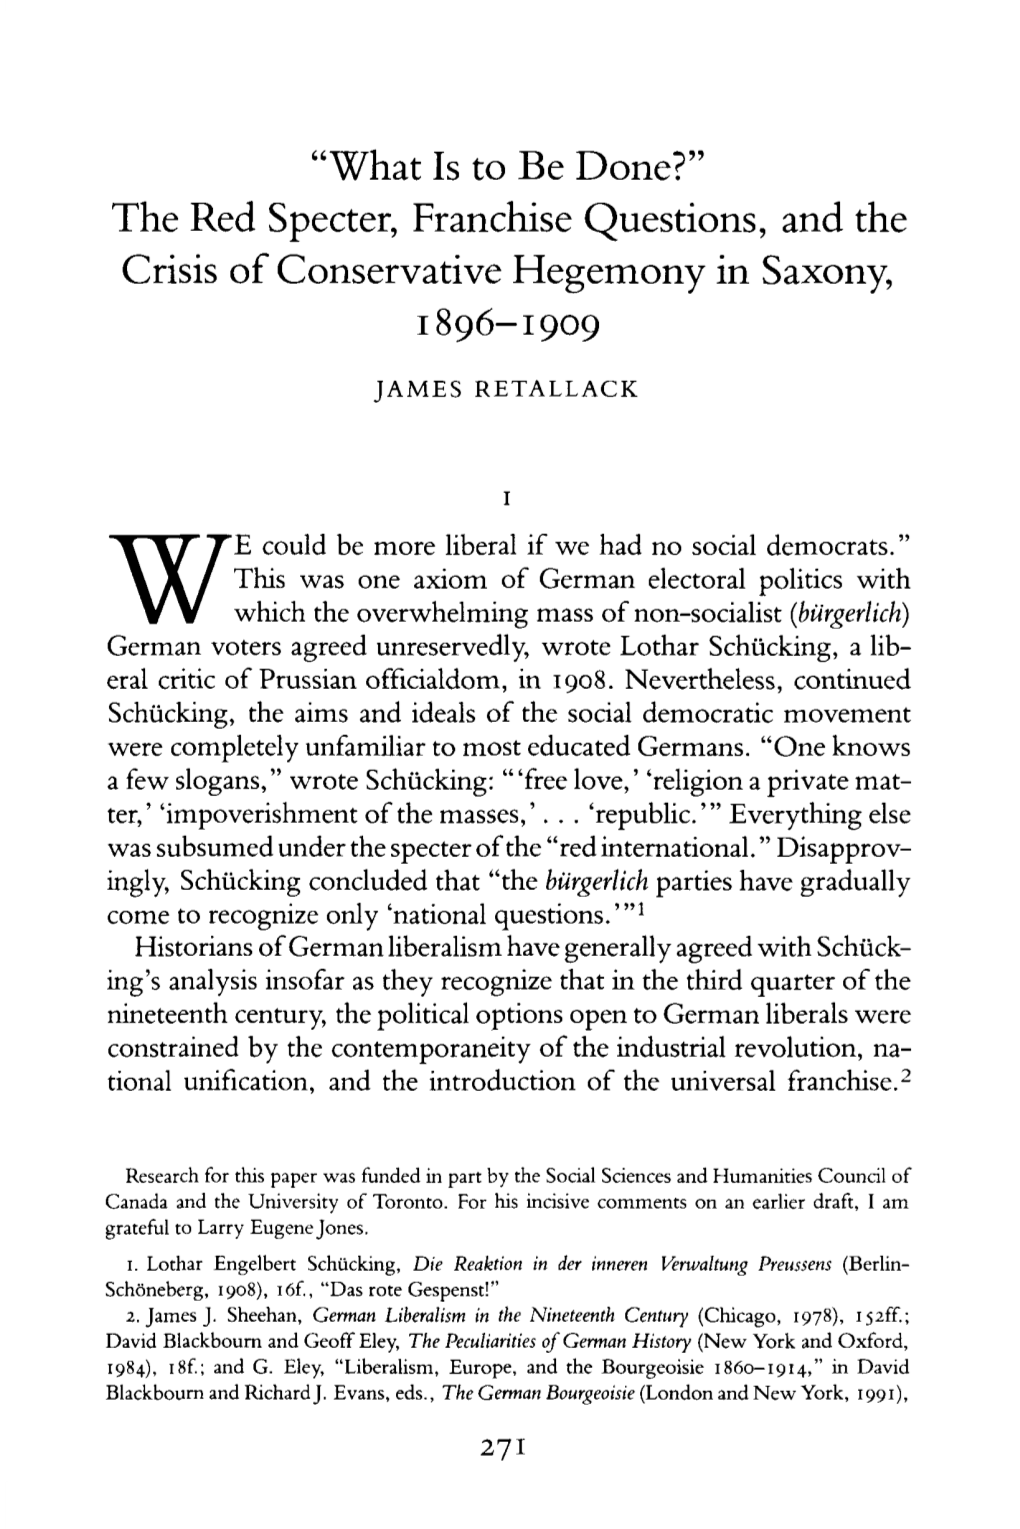 “What Is to Be Done?” the Red Specter, Franchise Questions, and the Crisis of Conservative Hegemony in Saxony, 1896–1909